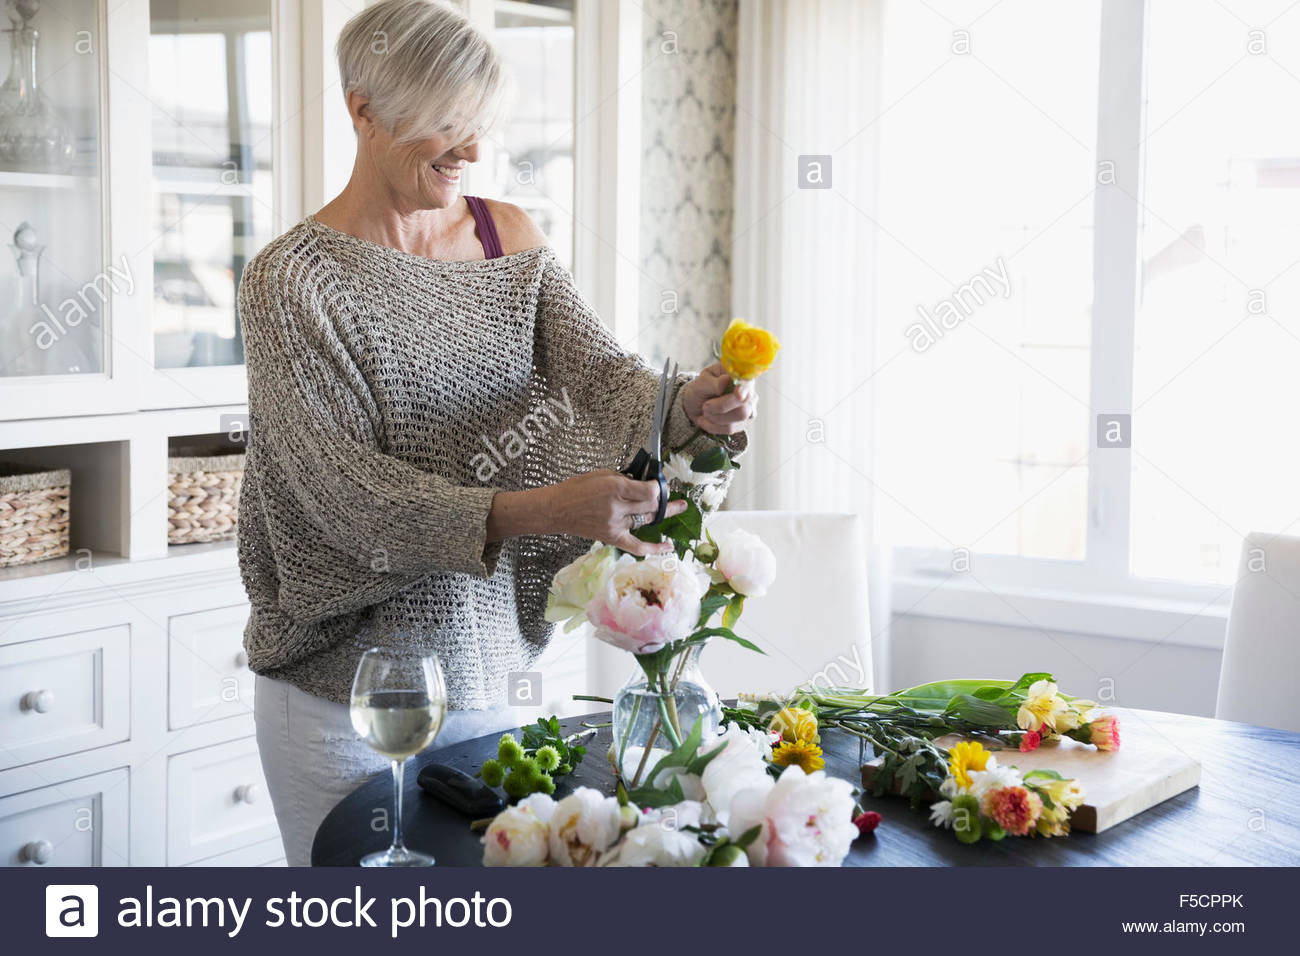 Woman arranging flowers and drinking wine Stock Photo